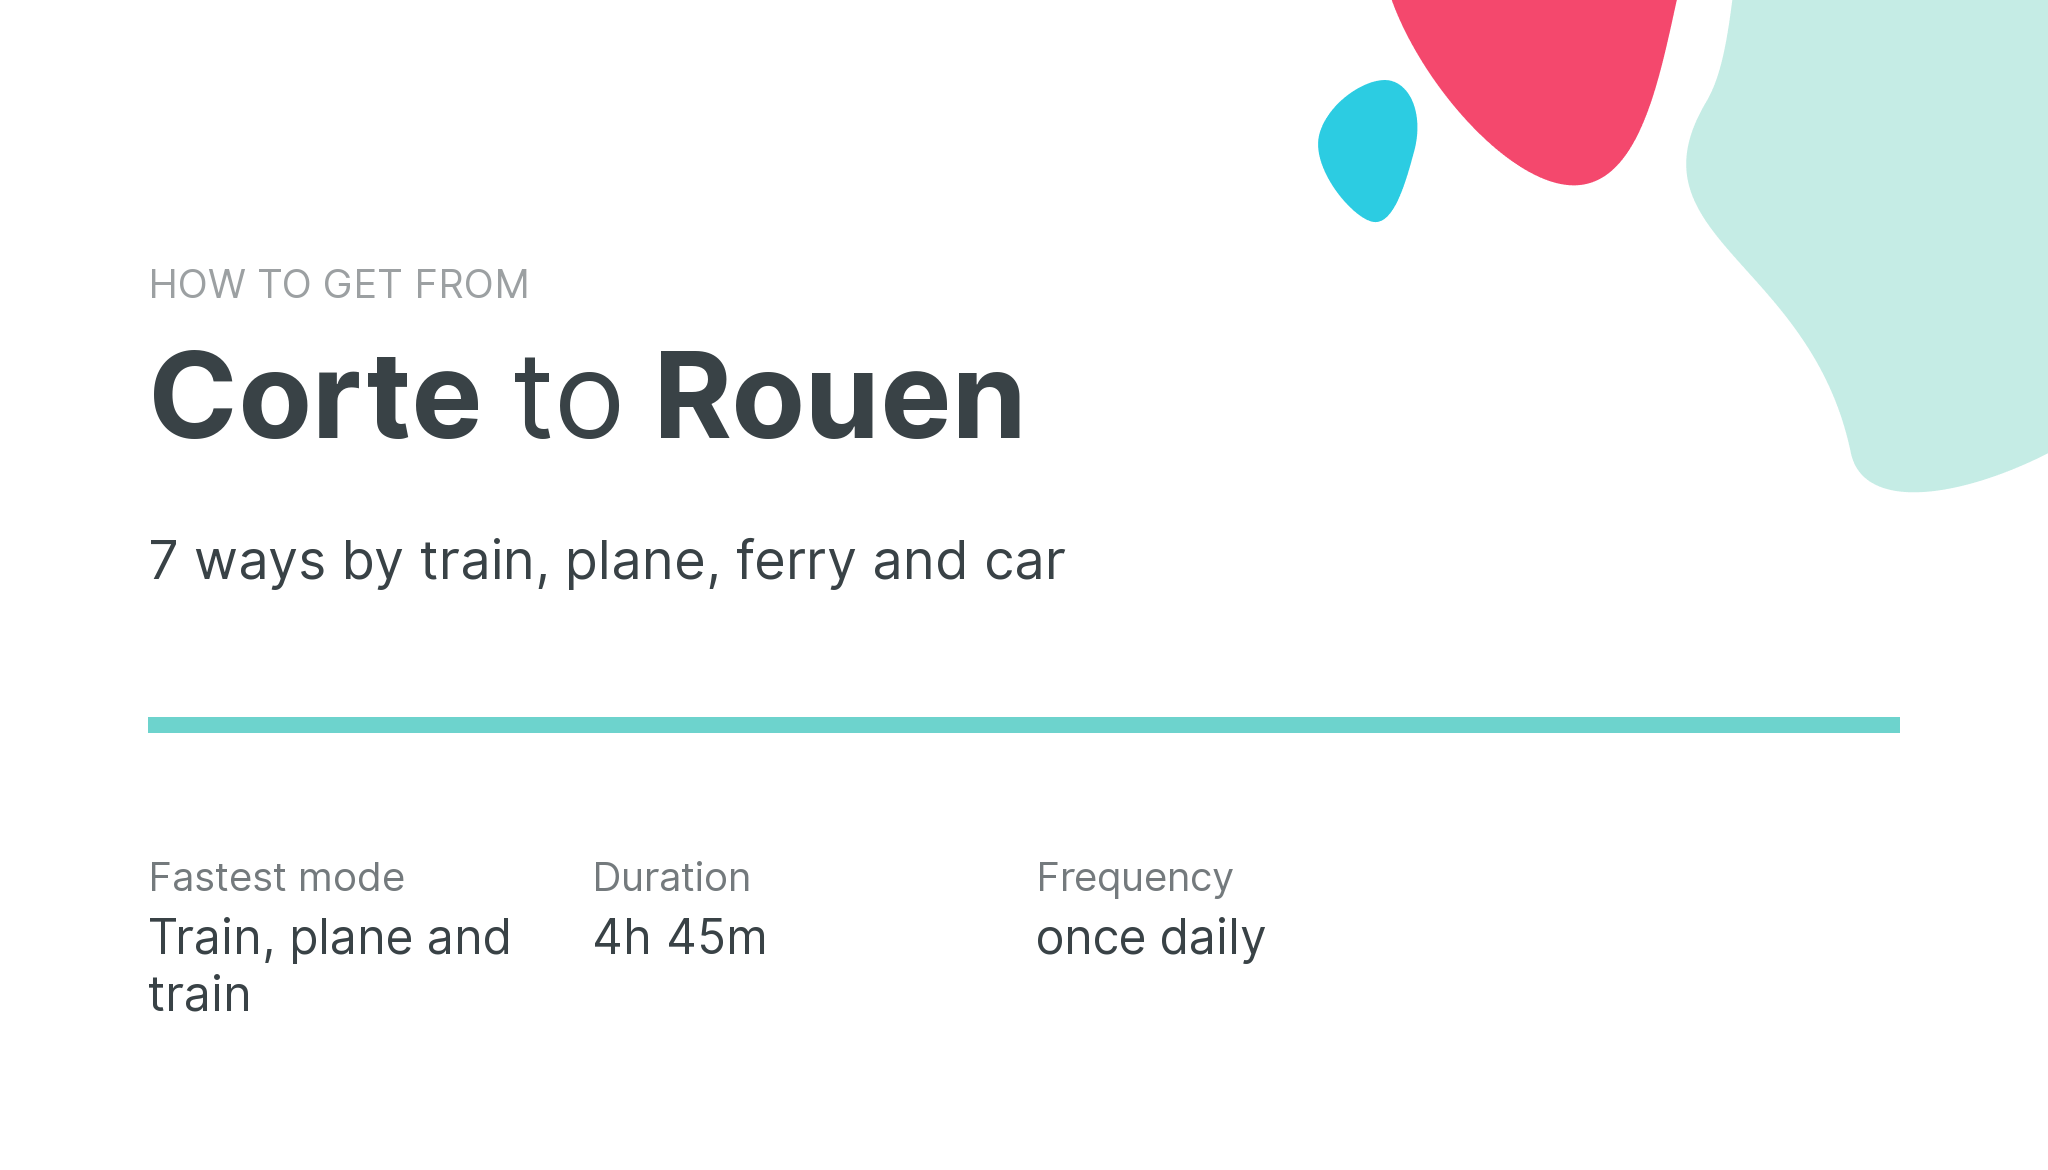 How do I get from Corte to Rouen